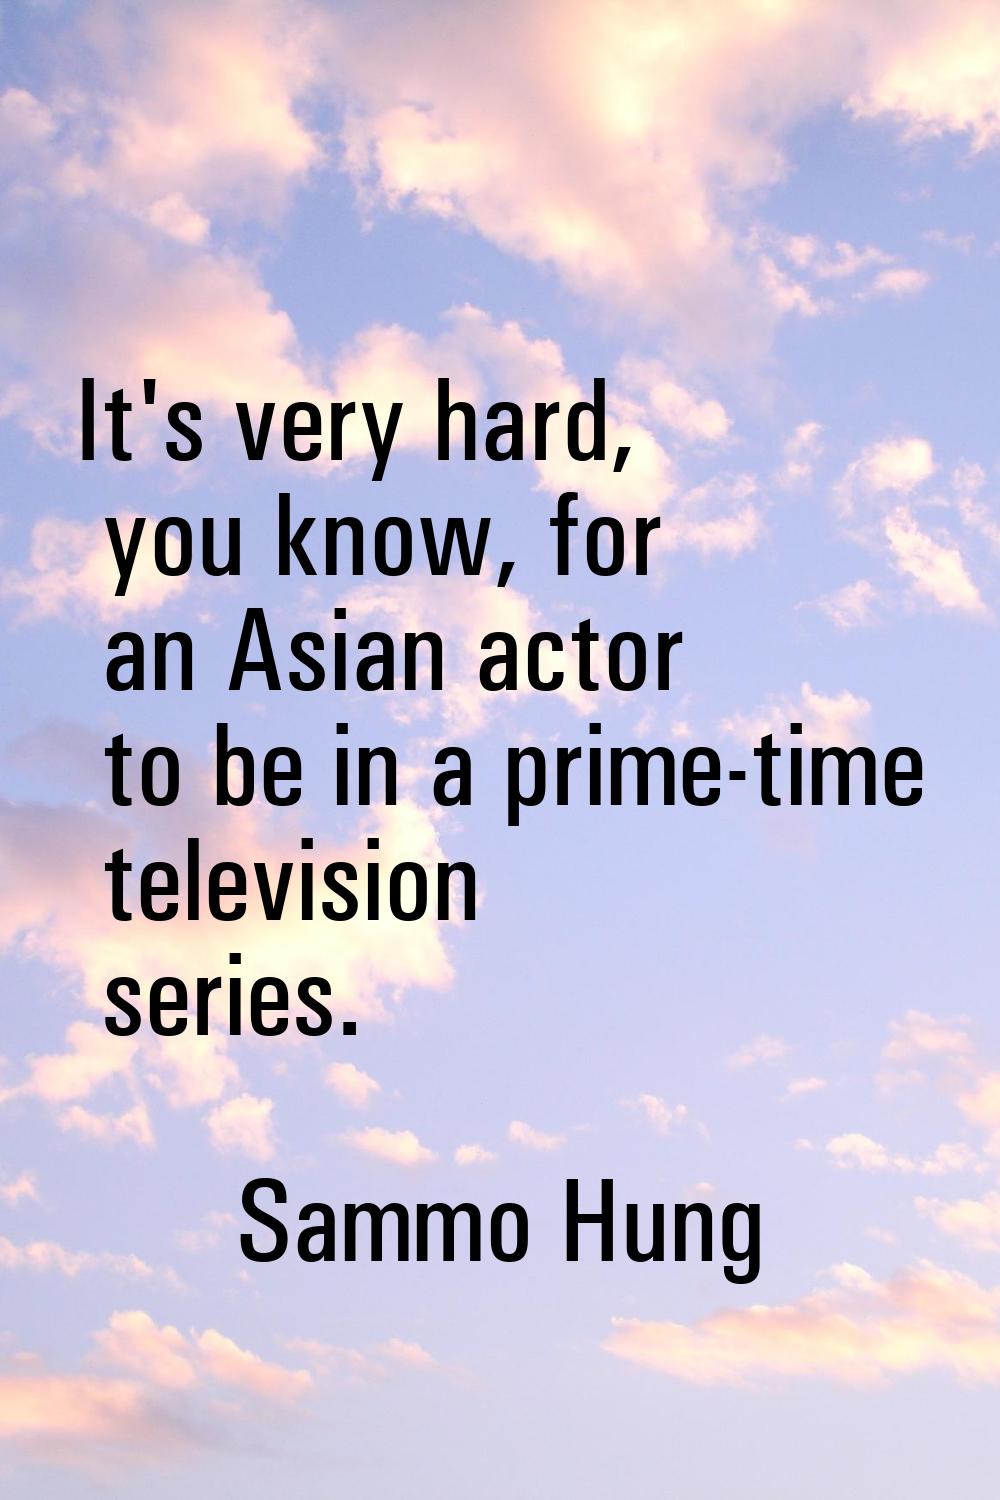 It's very hard, you know, for an Asian actor to be in a prime-time television series.